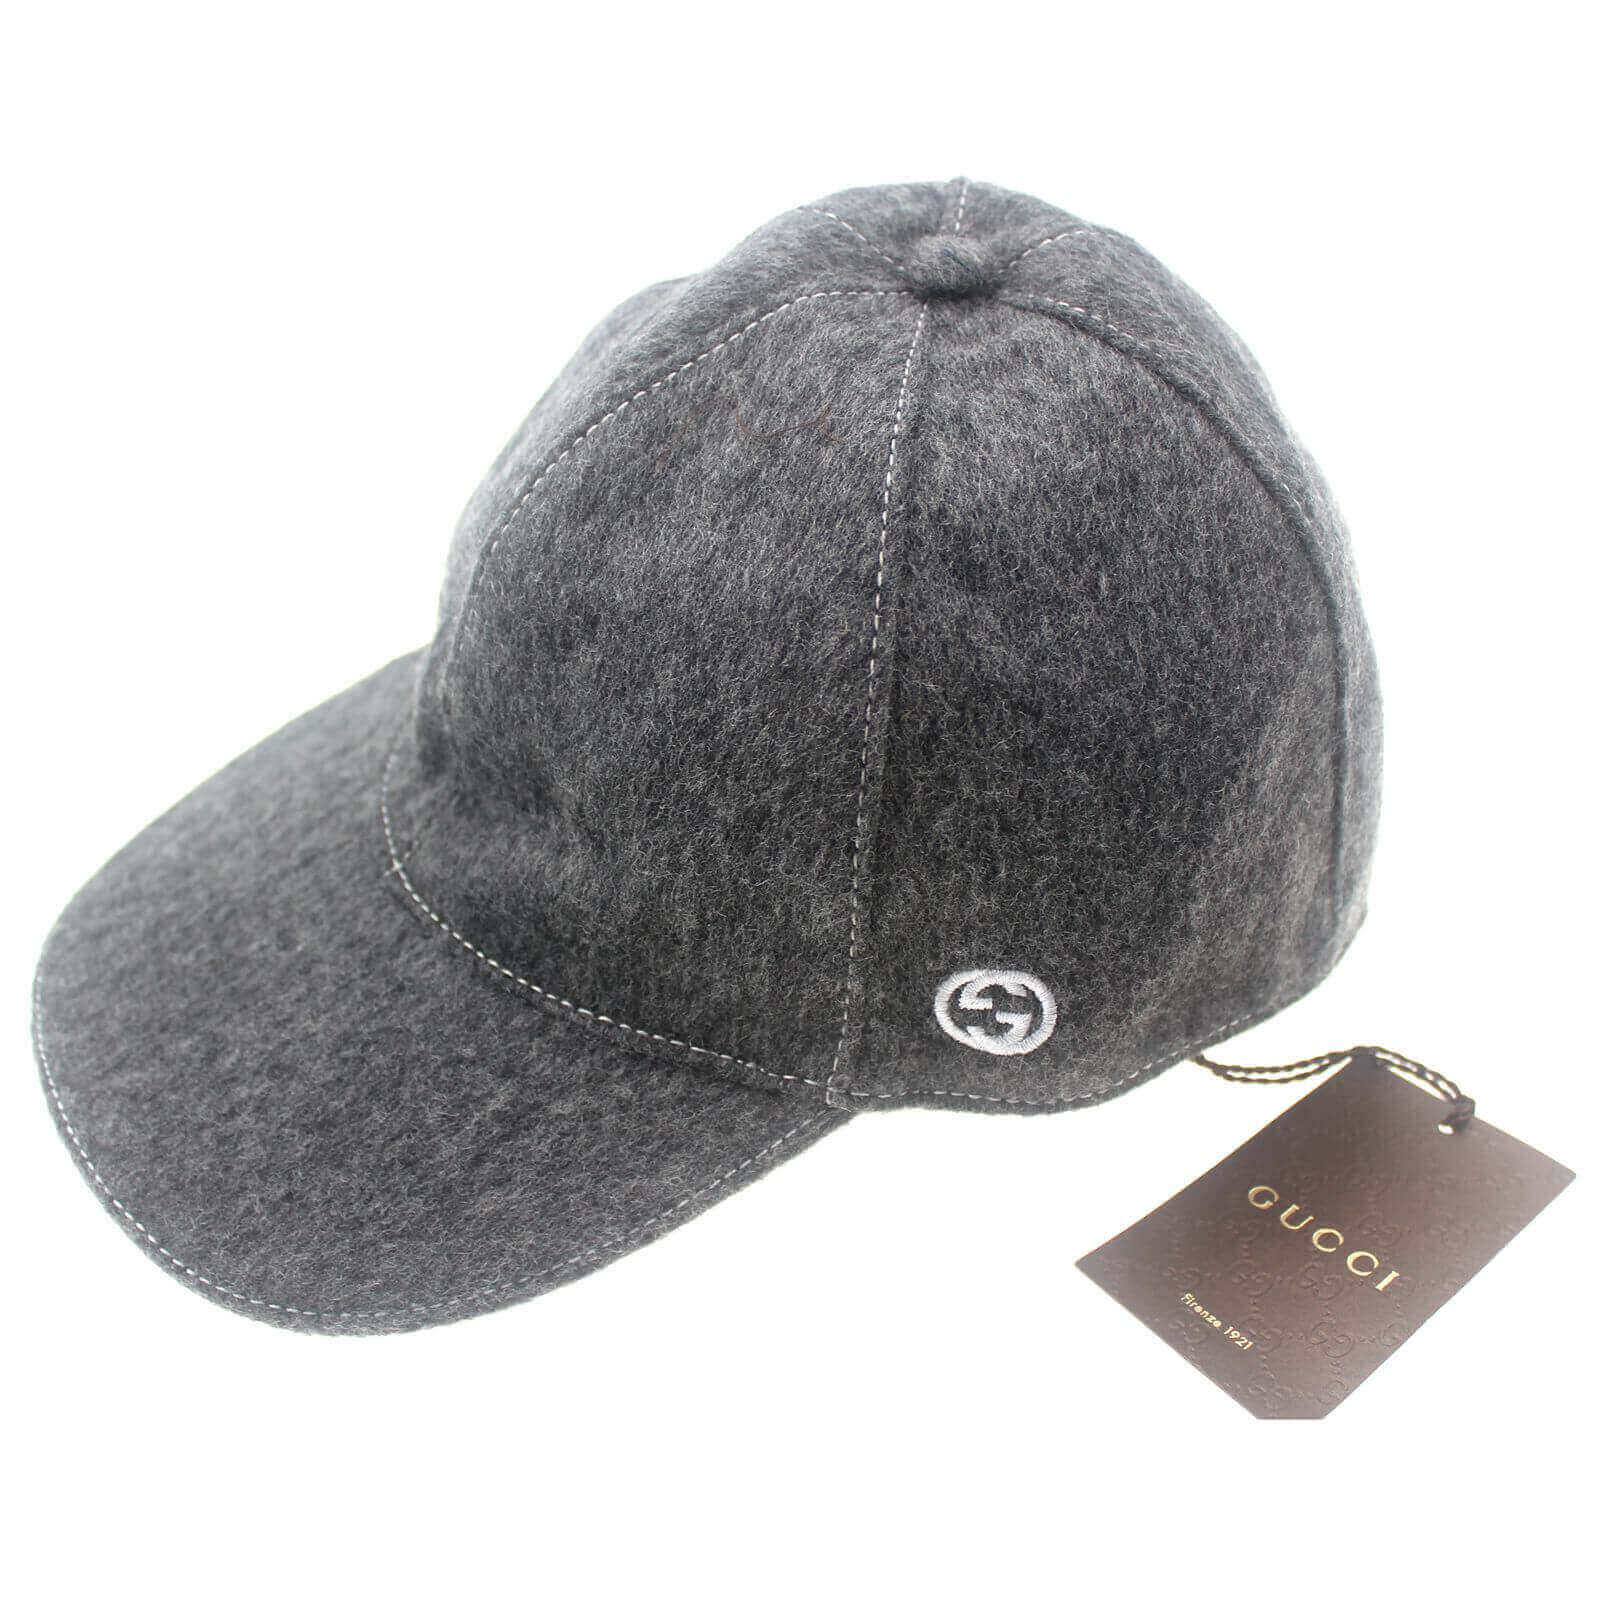 Hat Gucci Grey size M International in Polyester - 28850225